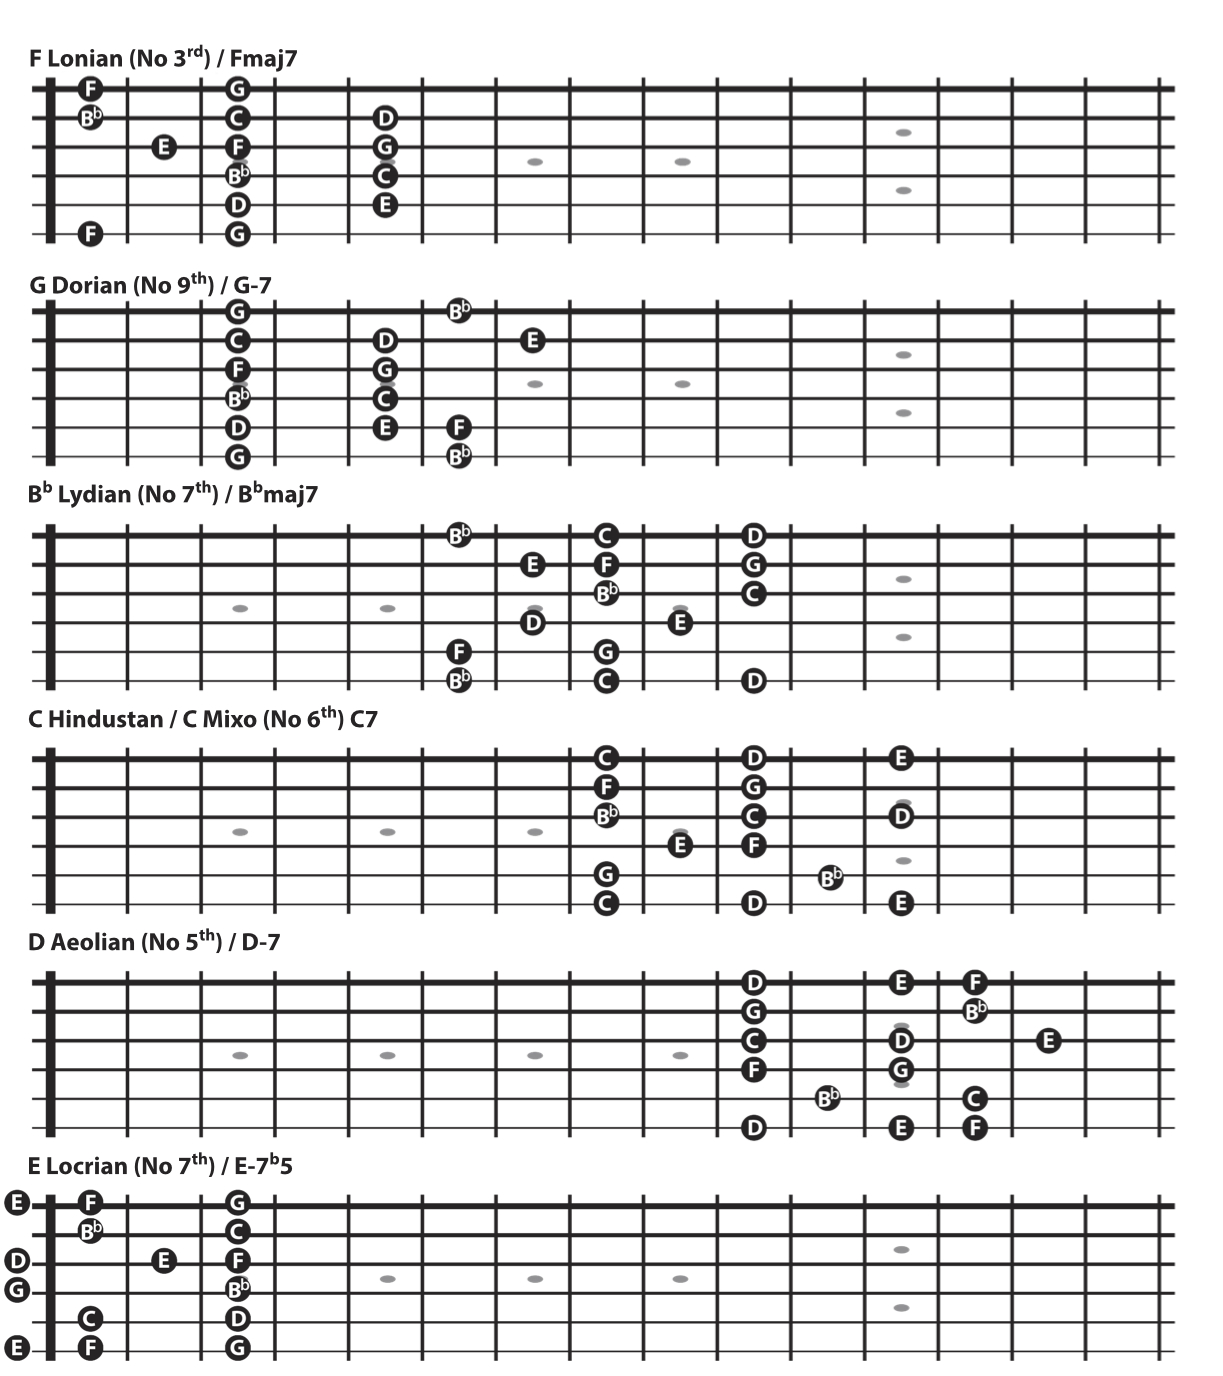 This is a Mixolydian scale minus the 6th